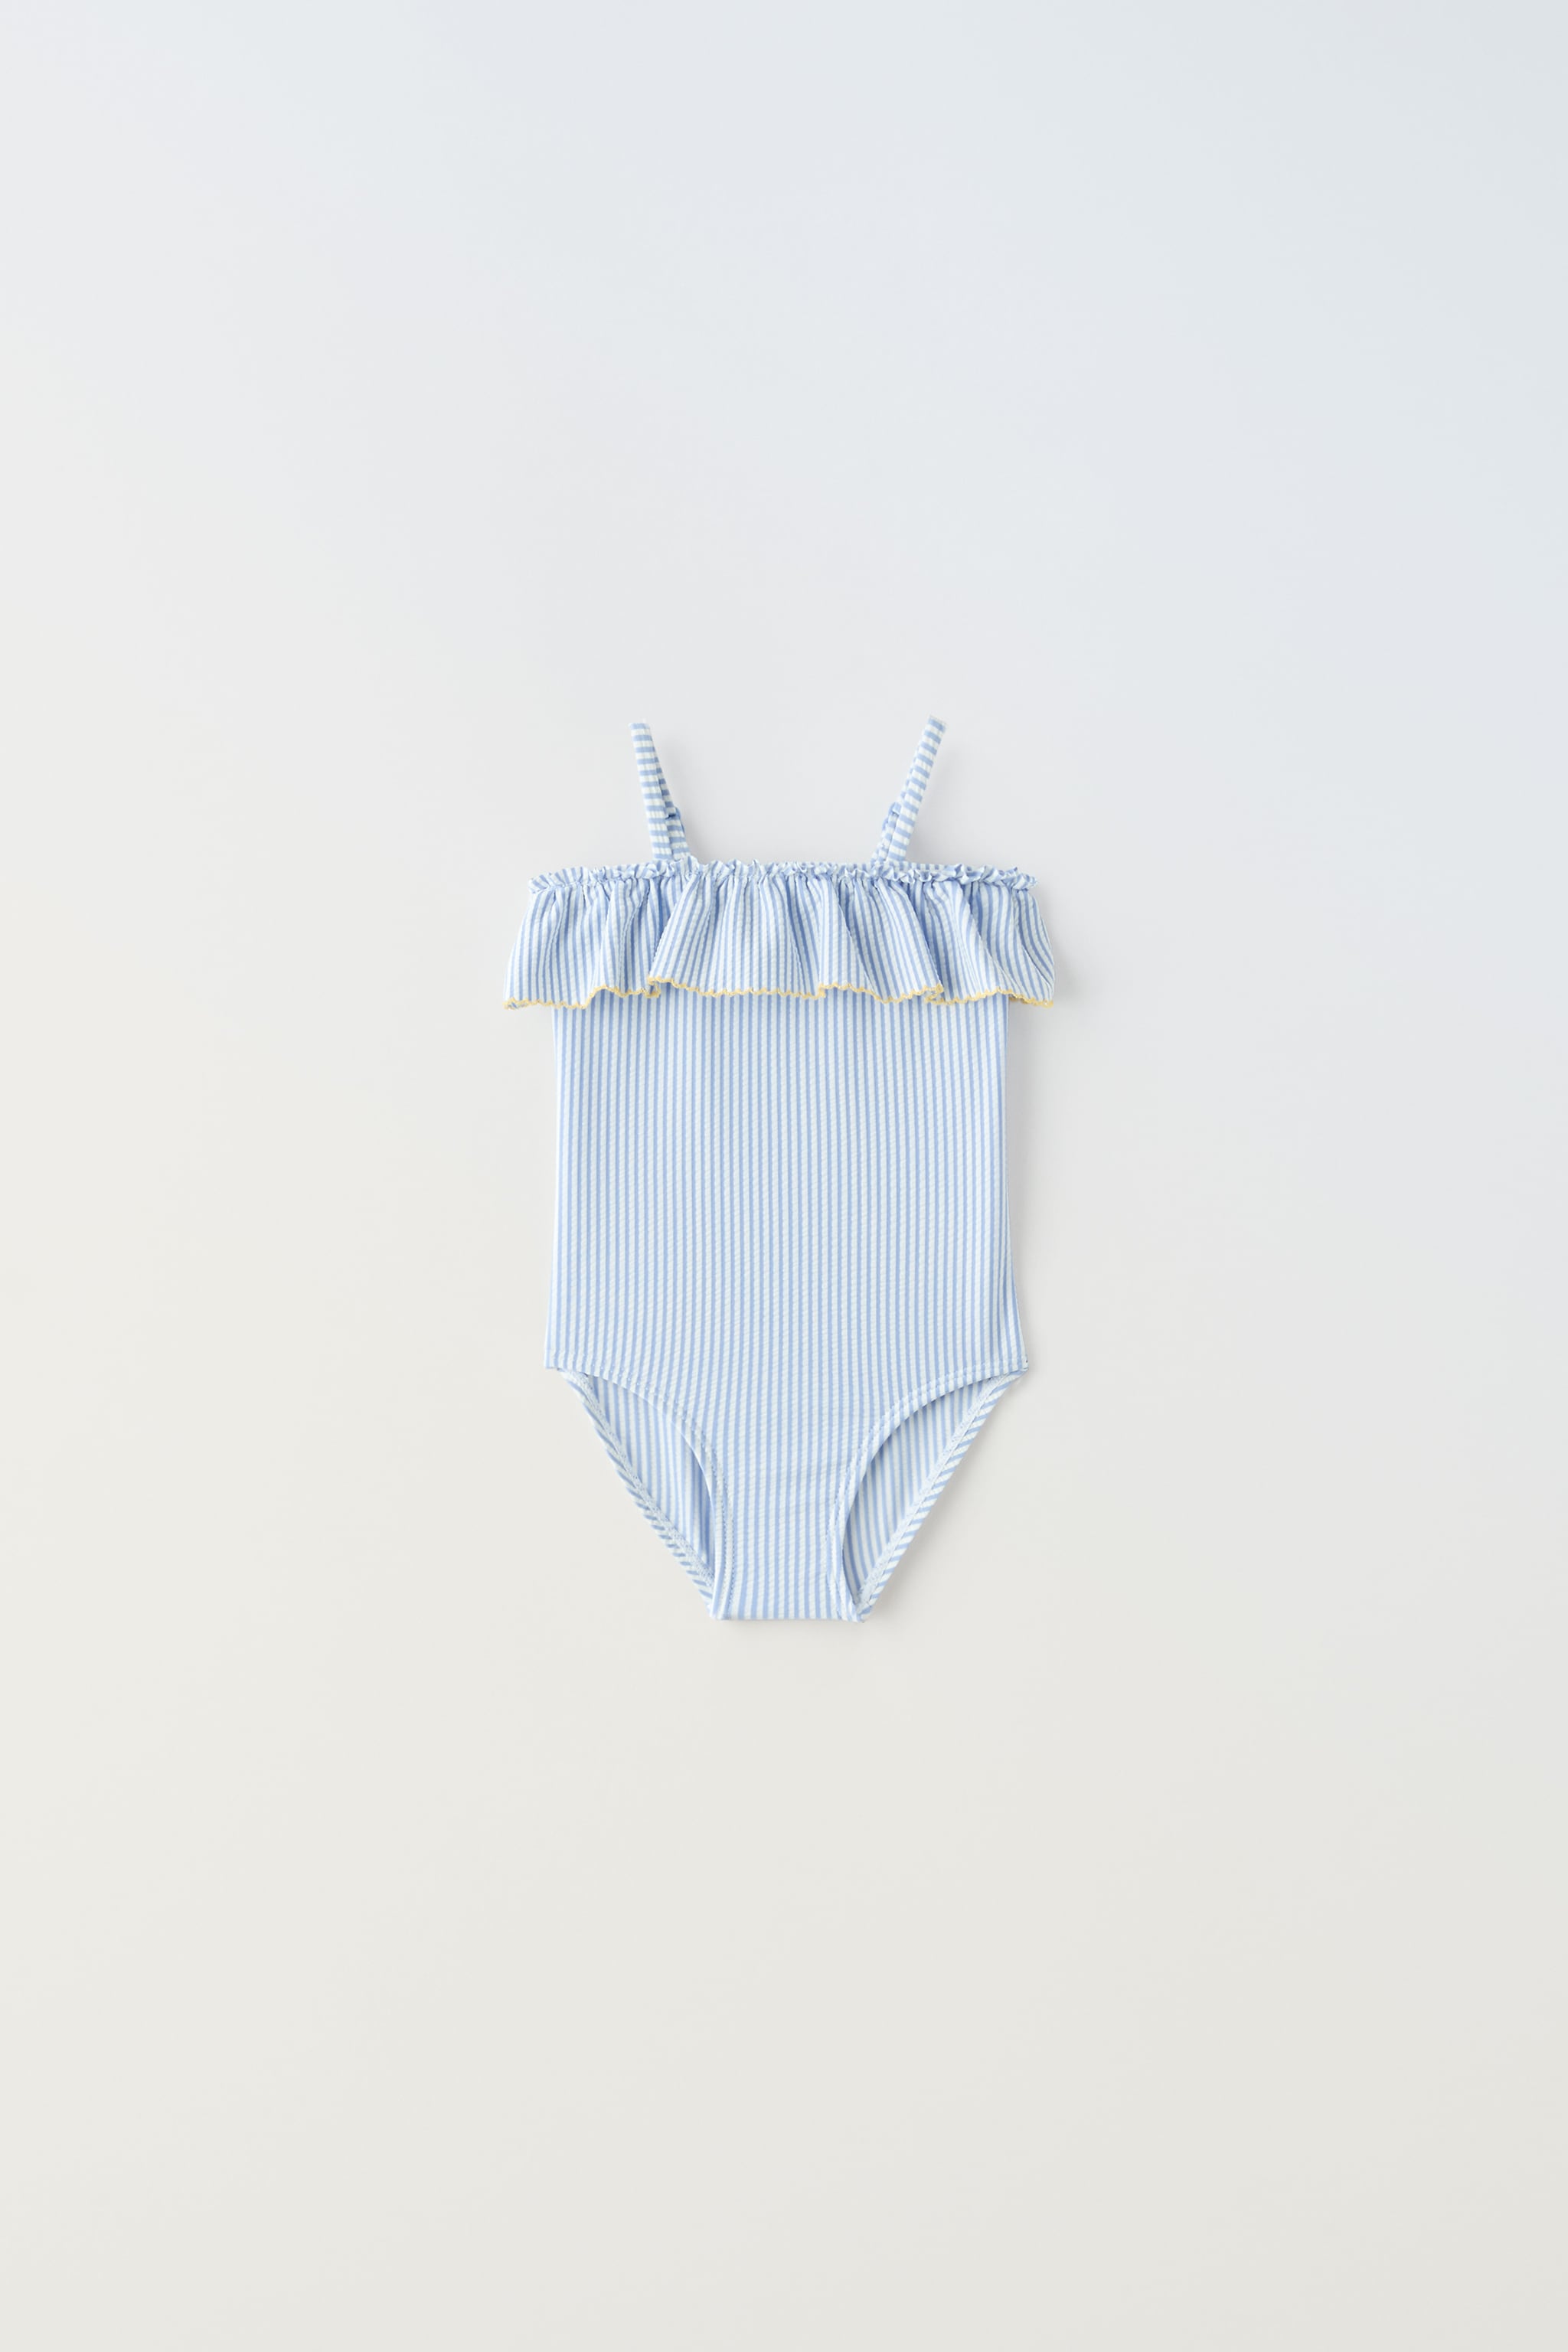 6 MONTHS - YEARS/ RUFFLED STRIPED SWIMSUIT